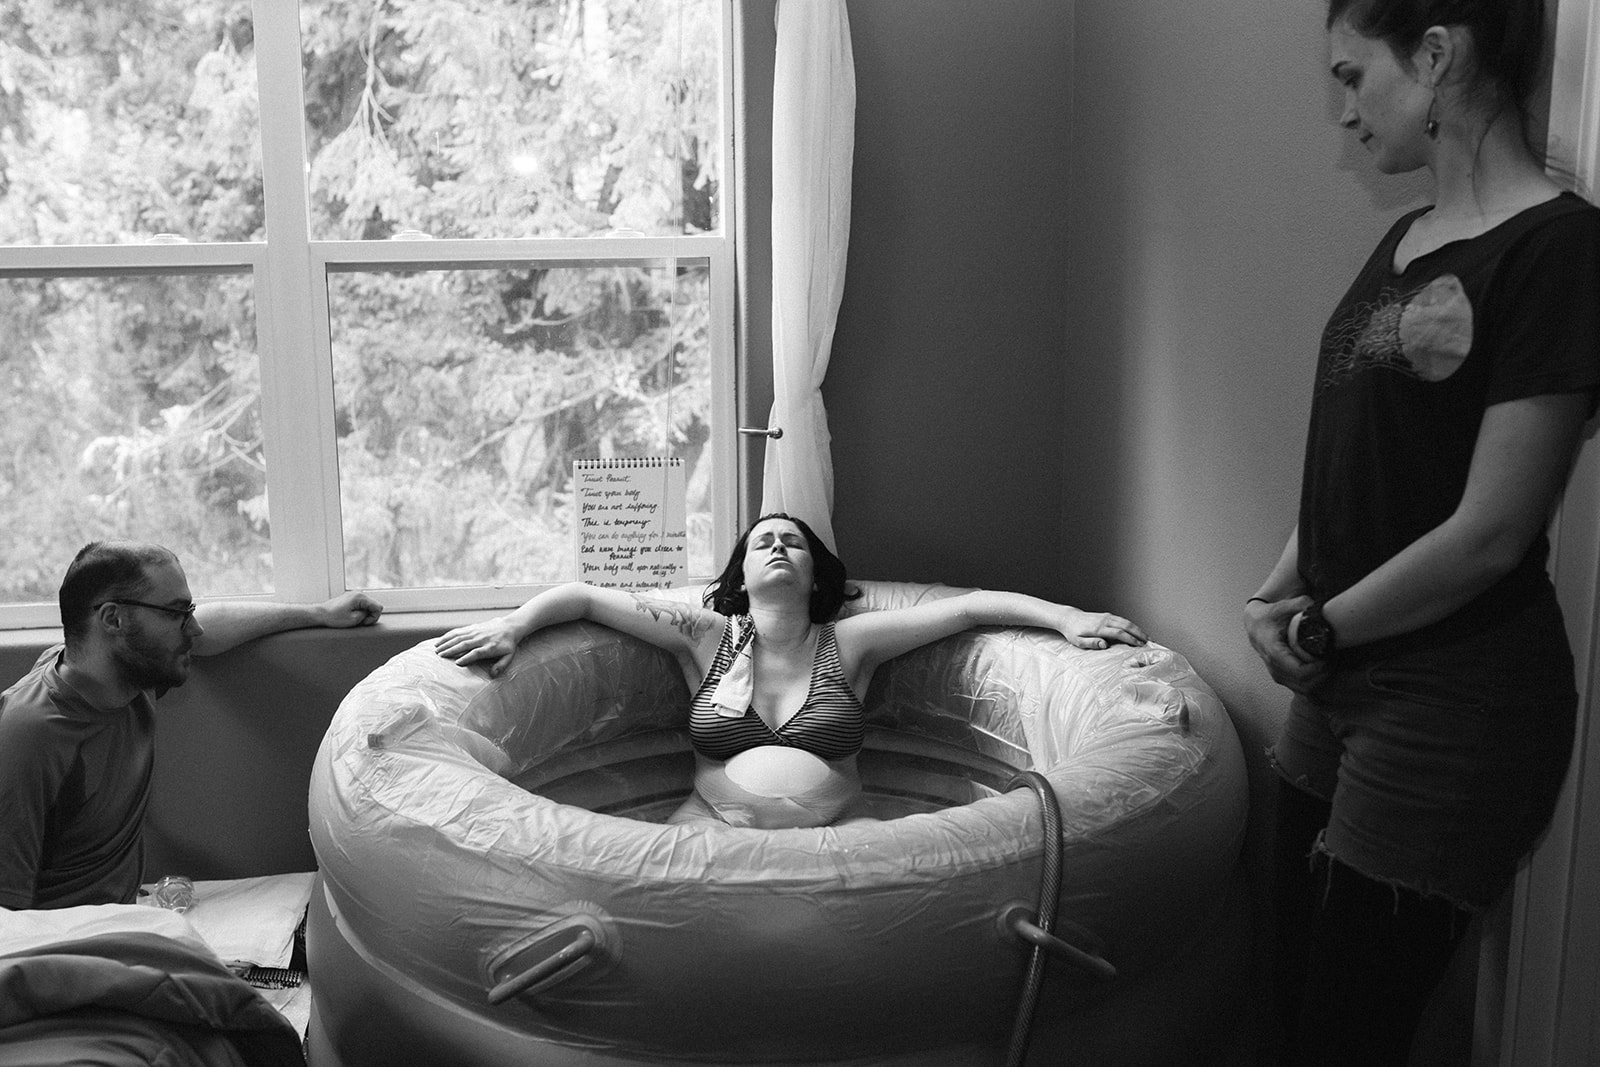 A woman in labor rests in her birthing tub at home with midwife and partner nearby.